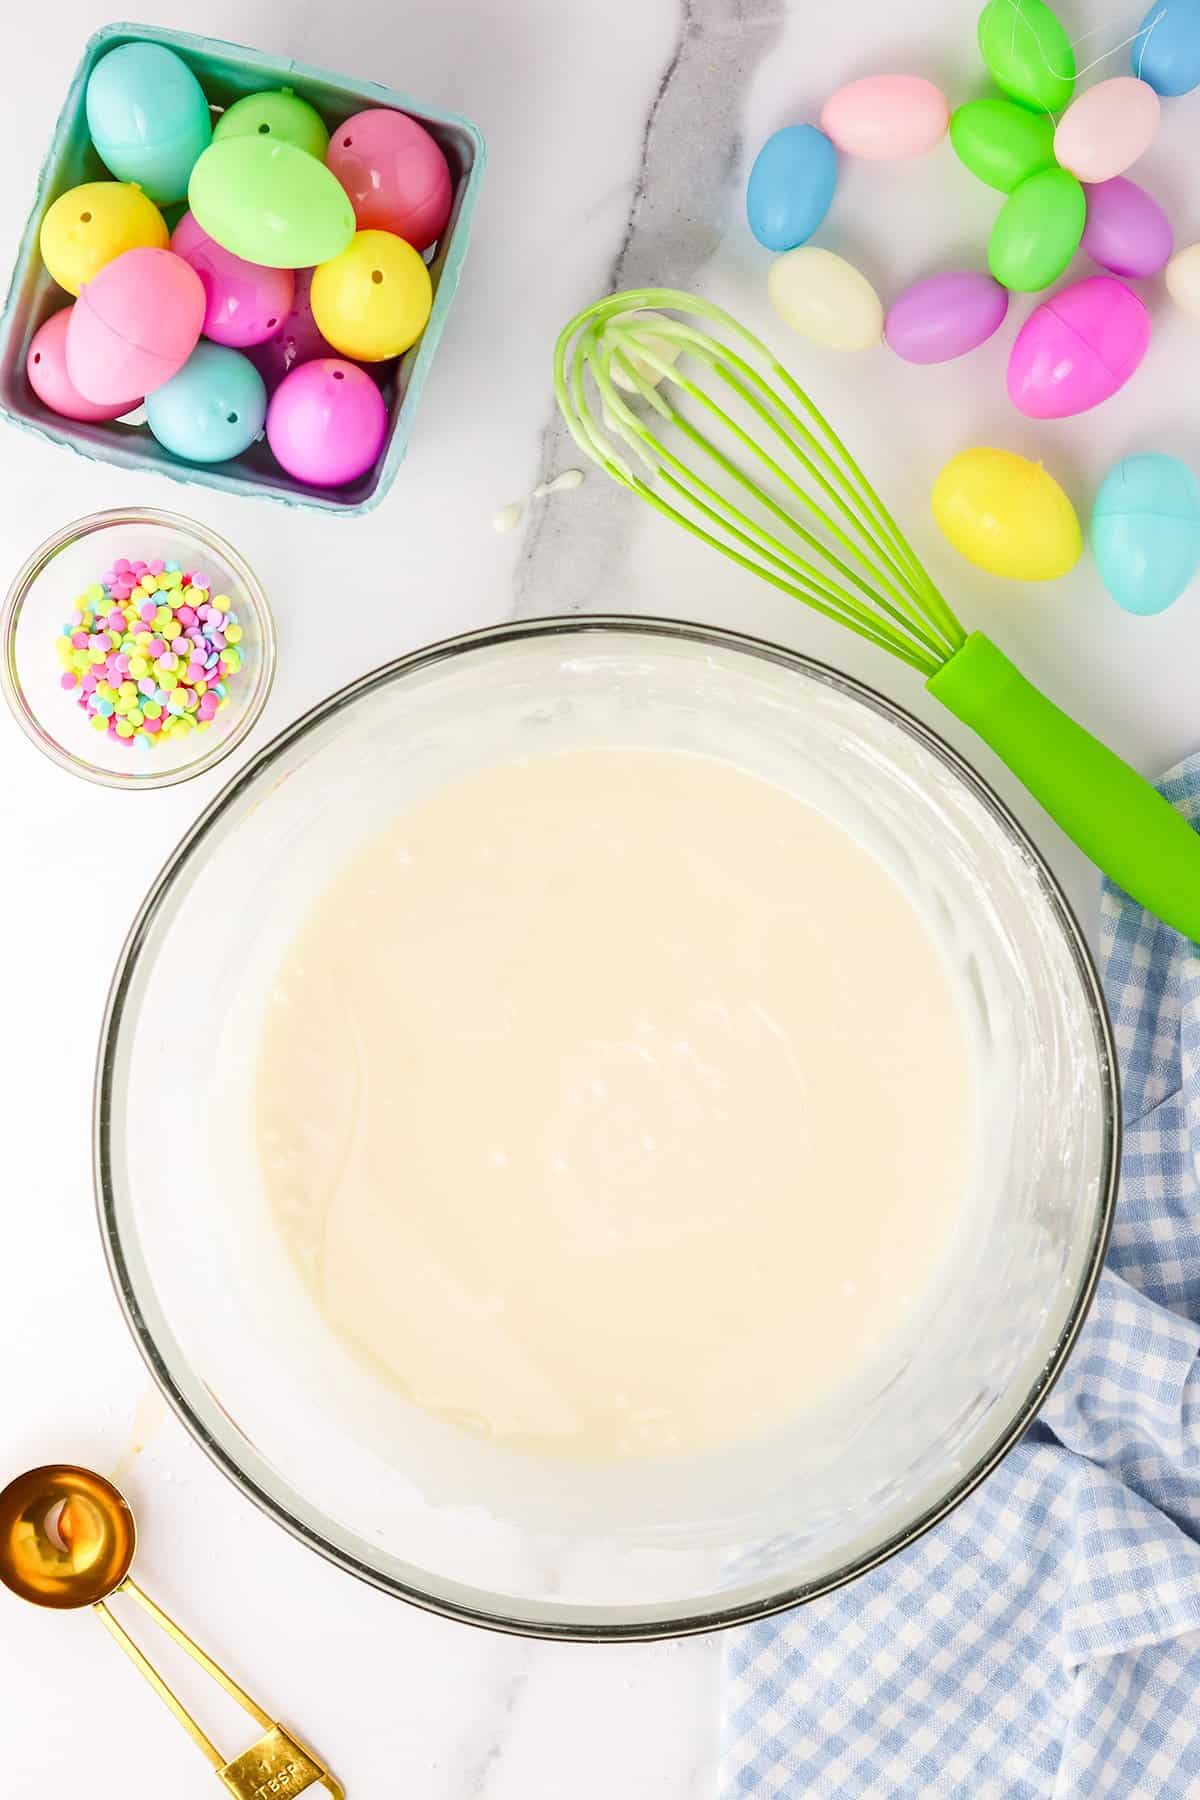 Ingredients and utensils for Easter baking, featuring colorful plastic eggs, Creme Egg Candy, and cake batter on a kitchen countertop.